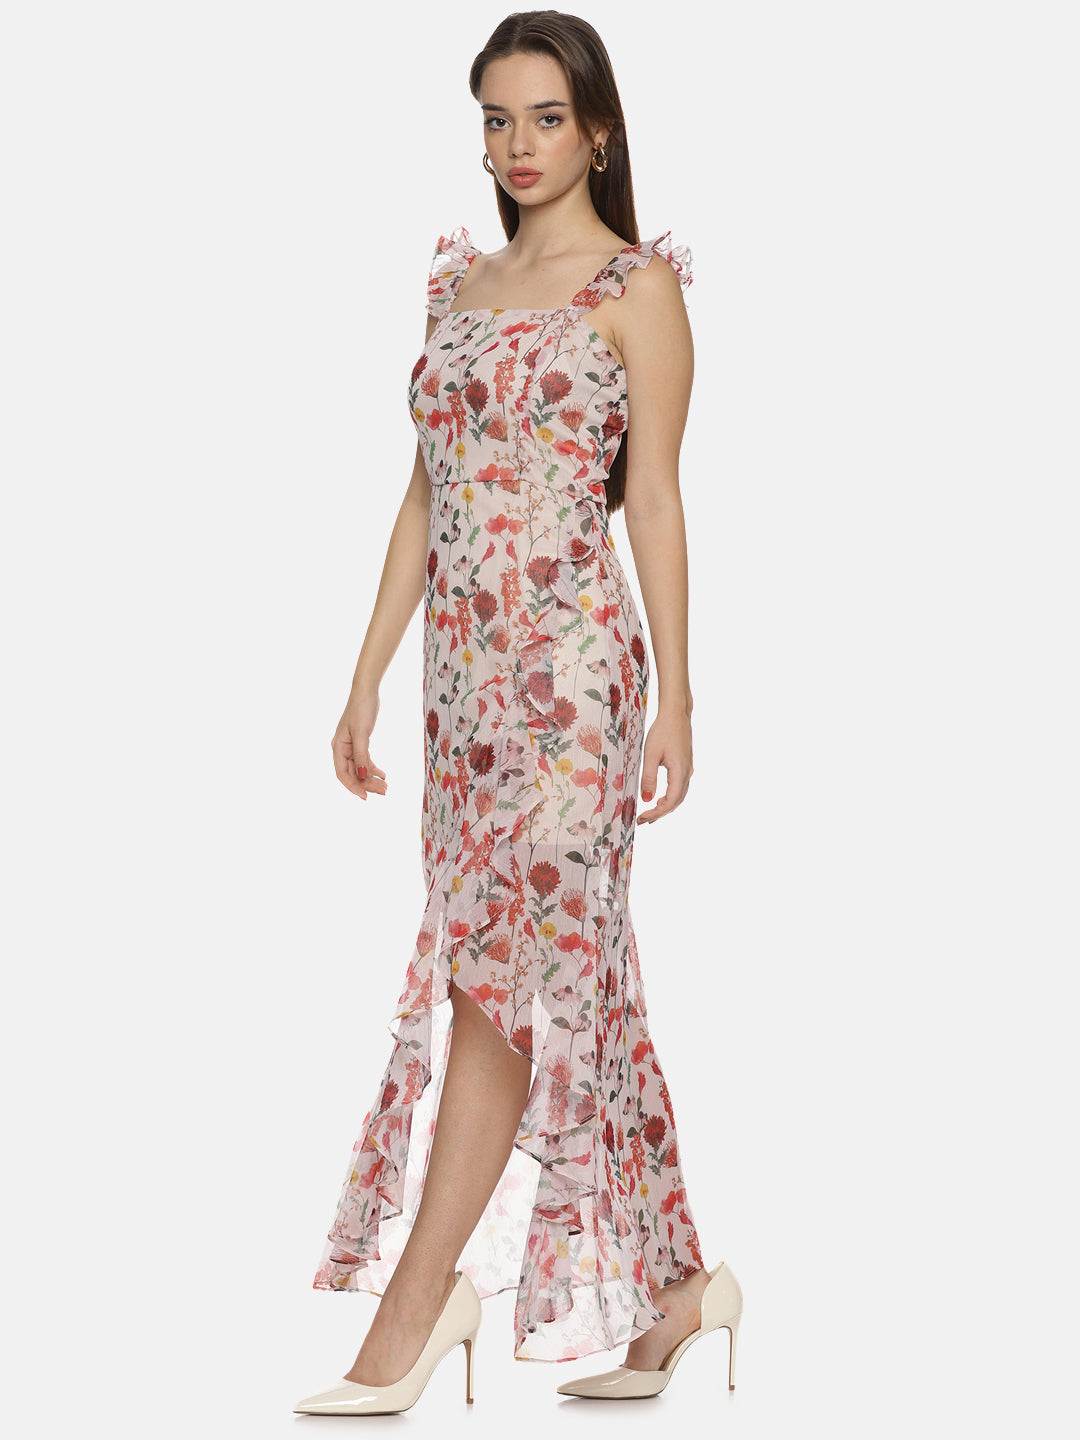 IS.U Floral Off-white High Low Dress